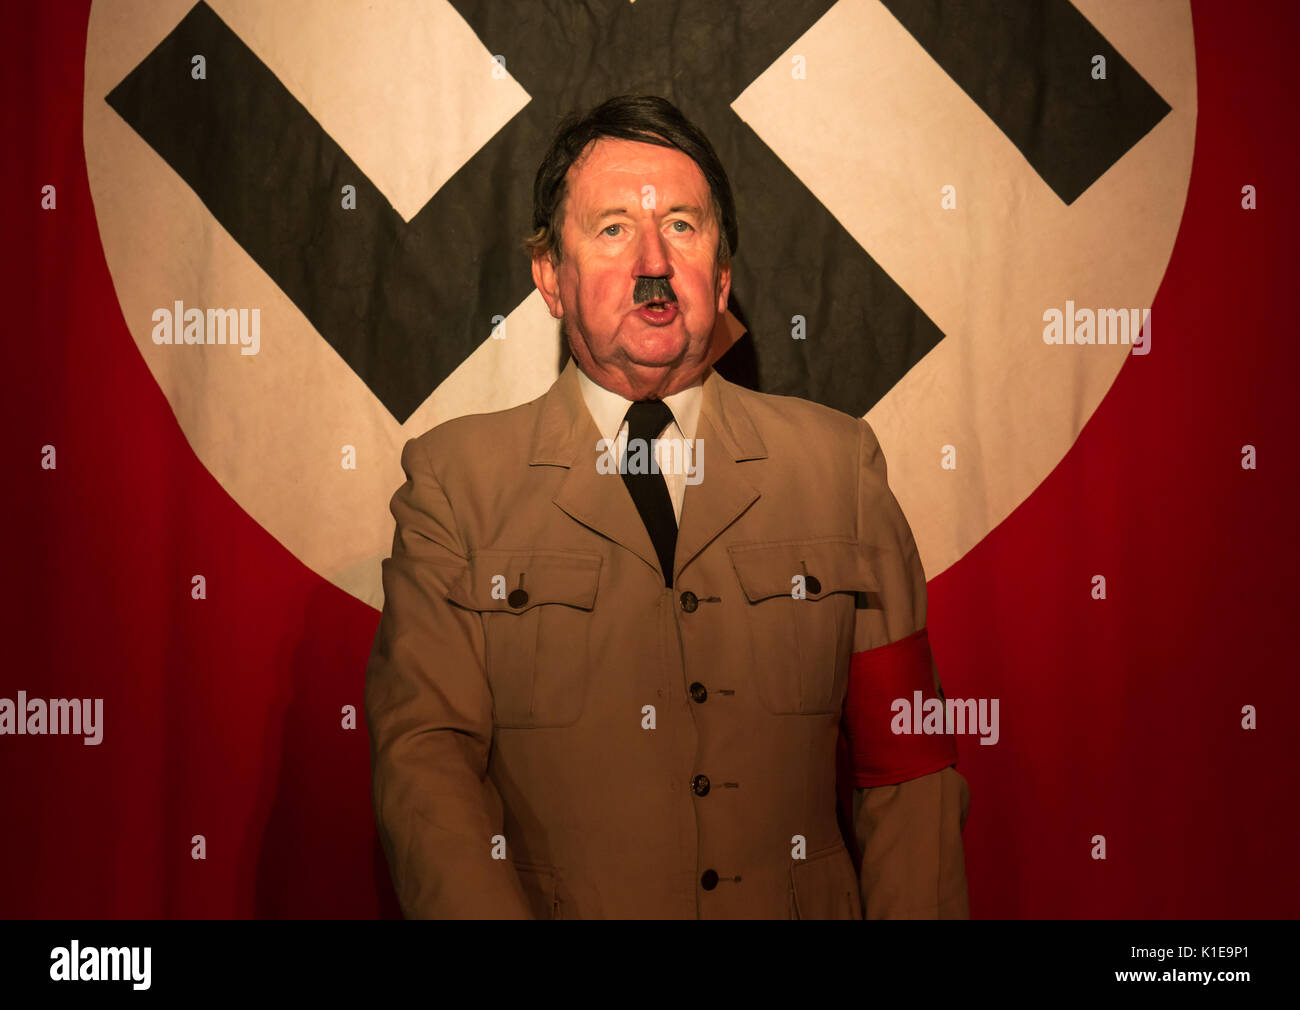 Pleasance Courtyard, Edinburgh, Scotland, United Kingdom, 26th August 2017. Pip Utton, versatile actor and Fringe Festival regular, in one man solo role of historical figure Adolf Hitler at Edinburgh Fringe Festival, Pleasance Courtyard, standing in front of a large banner with a swastika Stock Photo